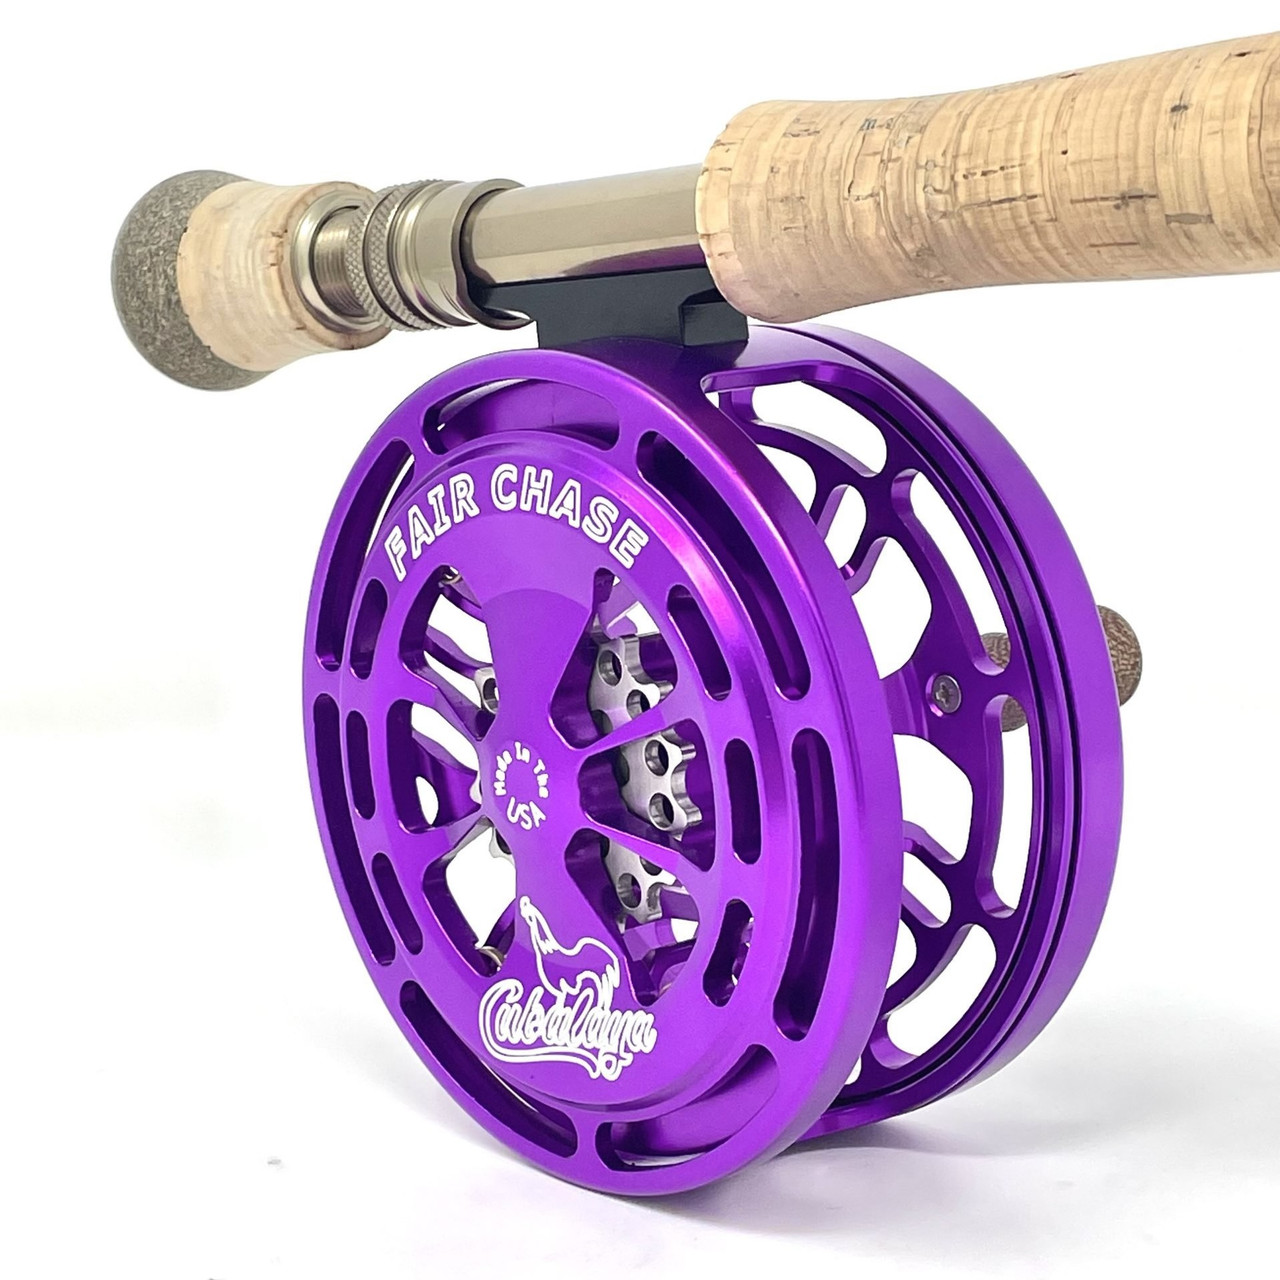 Fair Chase G2 Click Prawl Fly Reel Purple/Purple59420 - Gordy & Sons  Outfitters